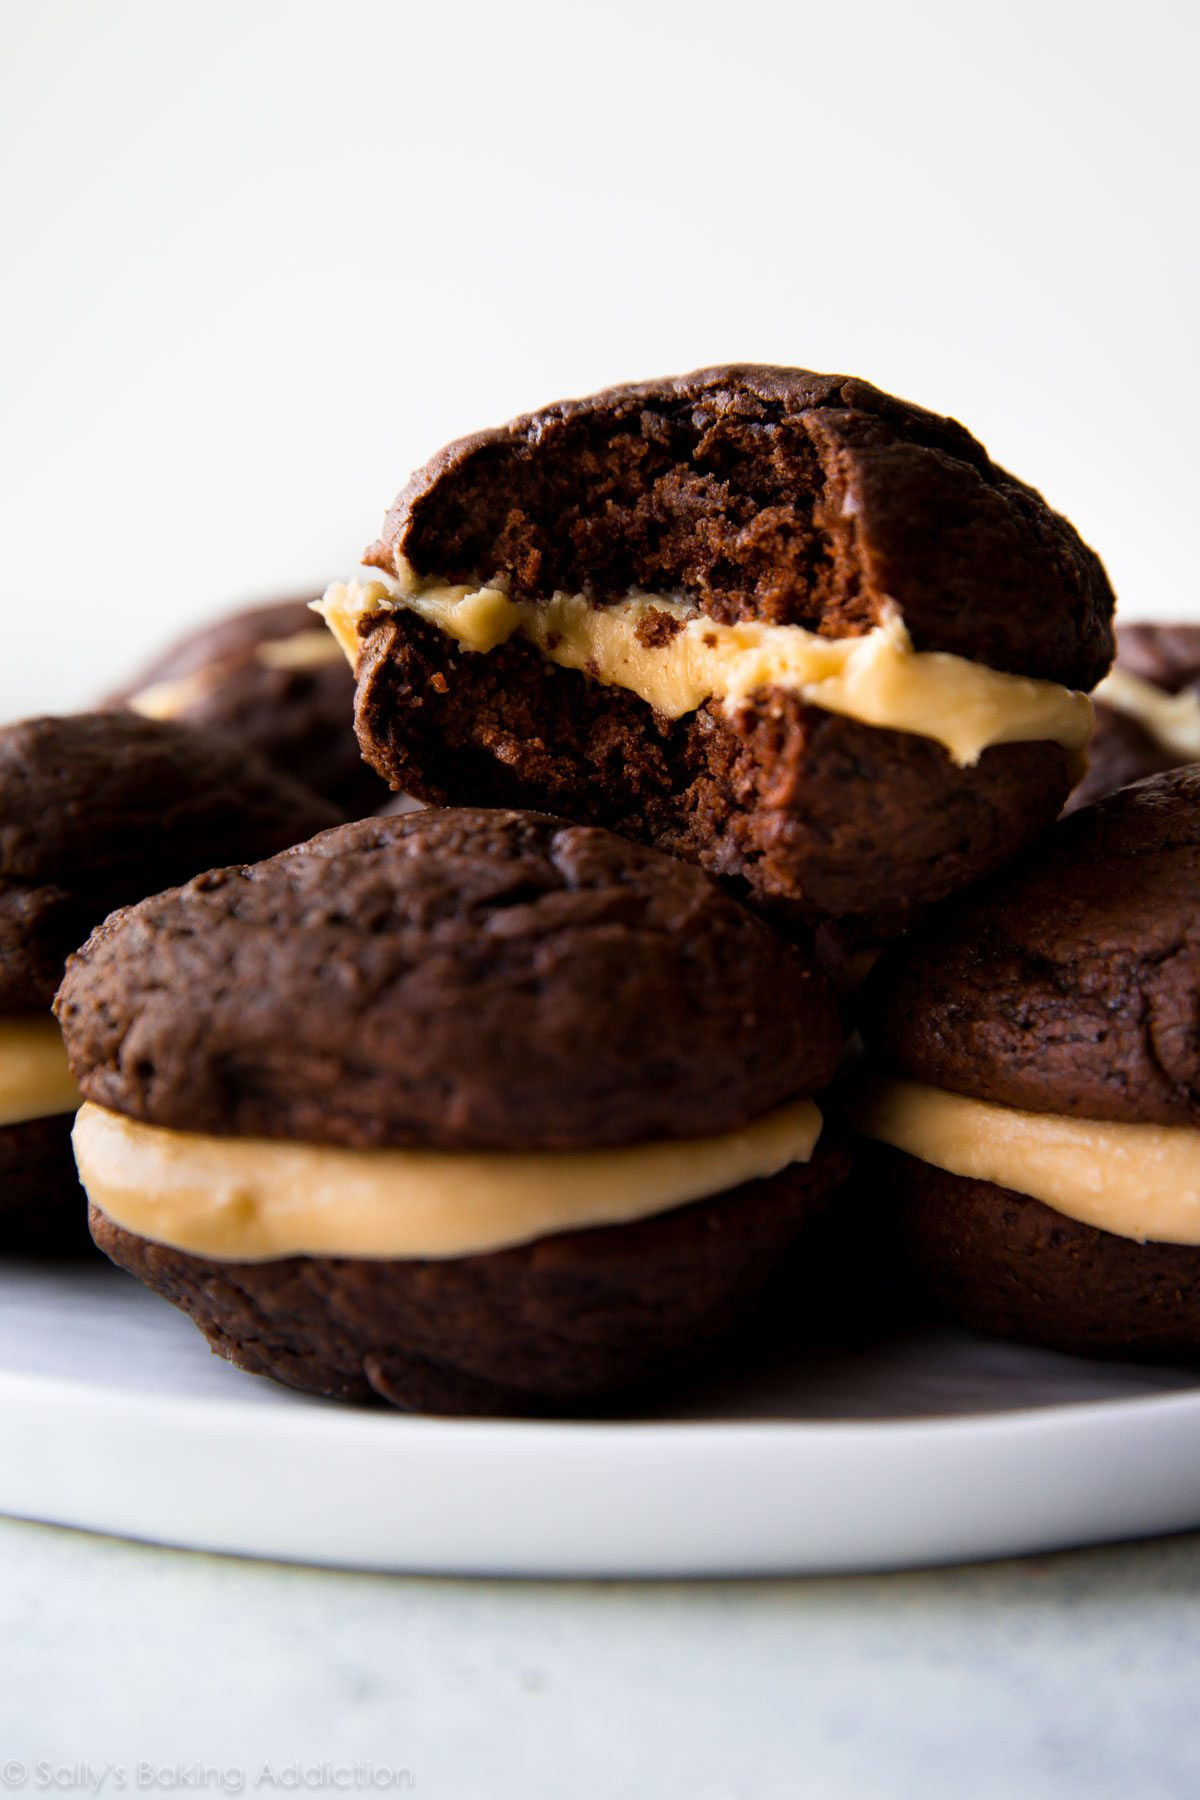 How To Make Whoopie Pies
 Chocolate Whoopie Pies with Salted Caramel Frosting